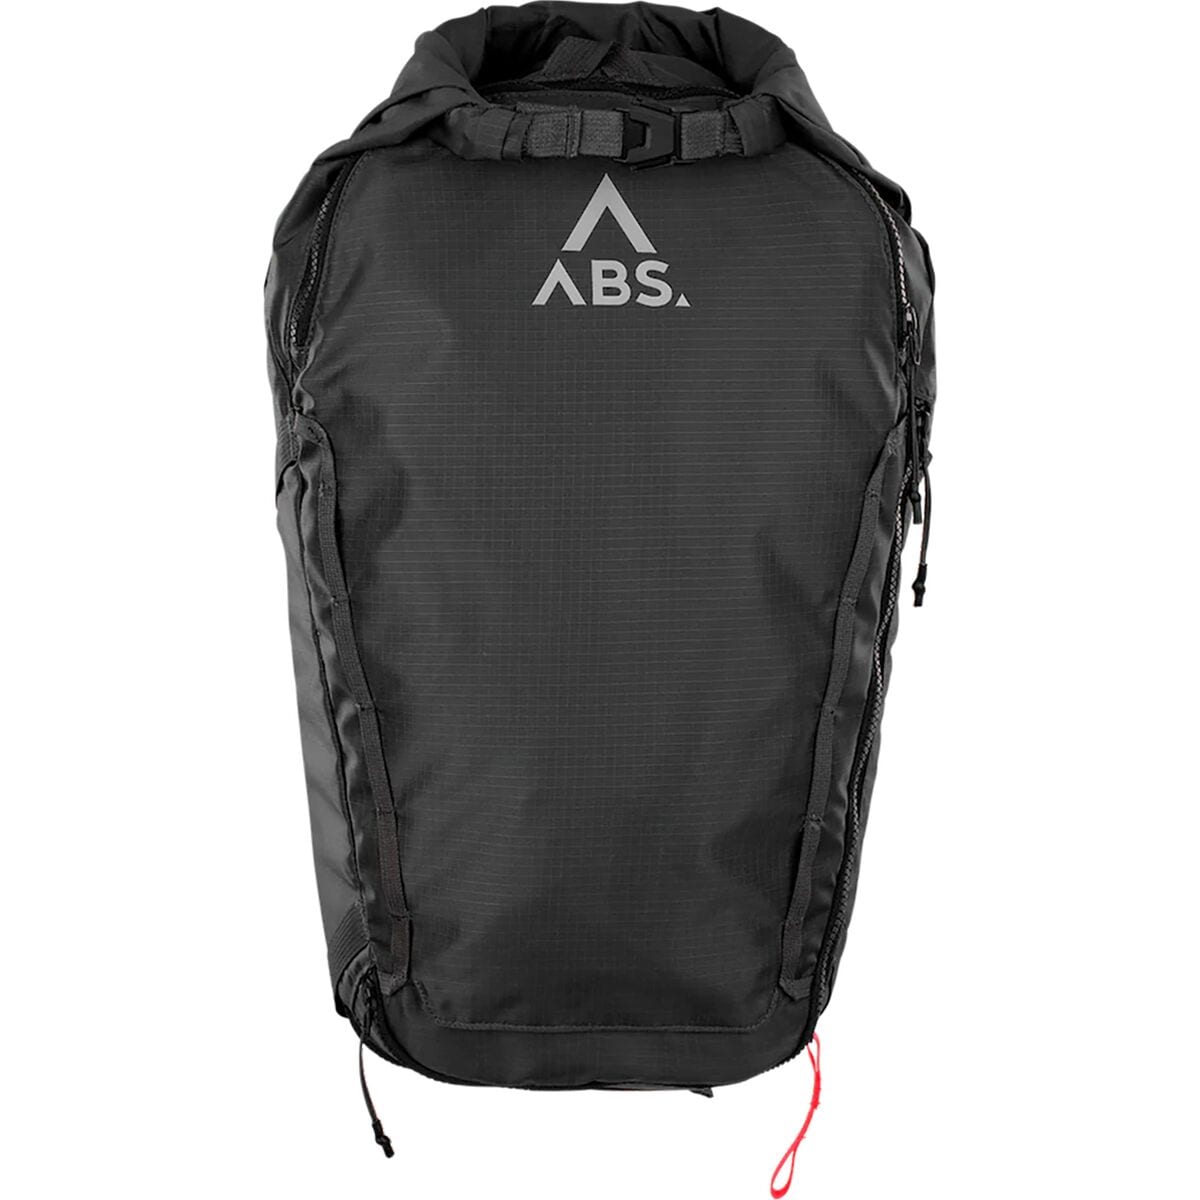 ABS Avalanche Rescue Devices A.Light Zipon 25-30L Dark Slate